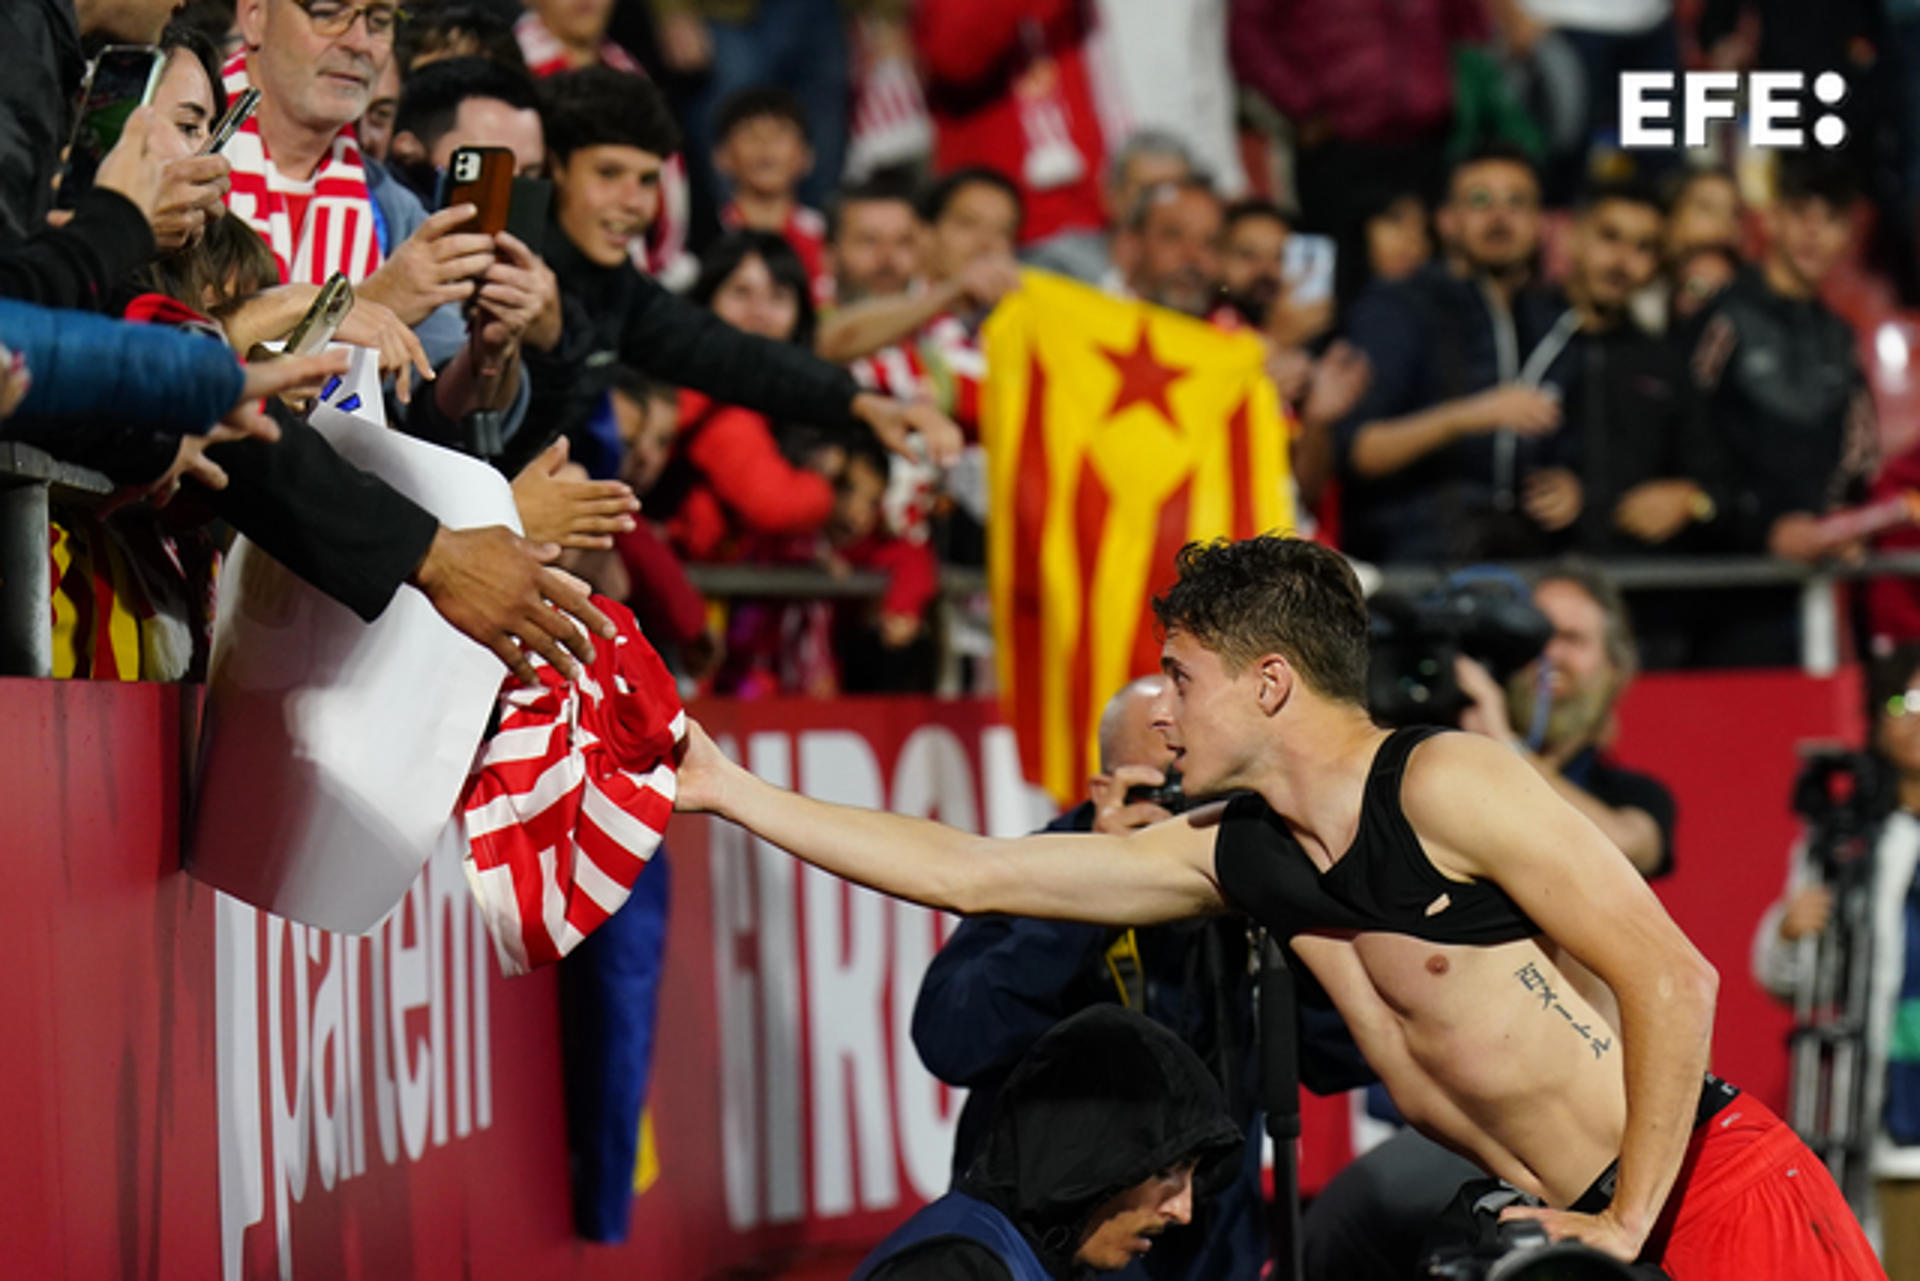 Girona FC midfielder Roro Riquelme (R) celebrates with supporters following a 4-2 victory over Real Madrid in a LaLiga match at Montilivi stadium in Girona, Spain, on 25 April 2023. EFE/Siu Wu
